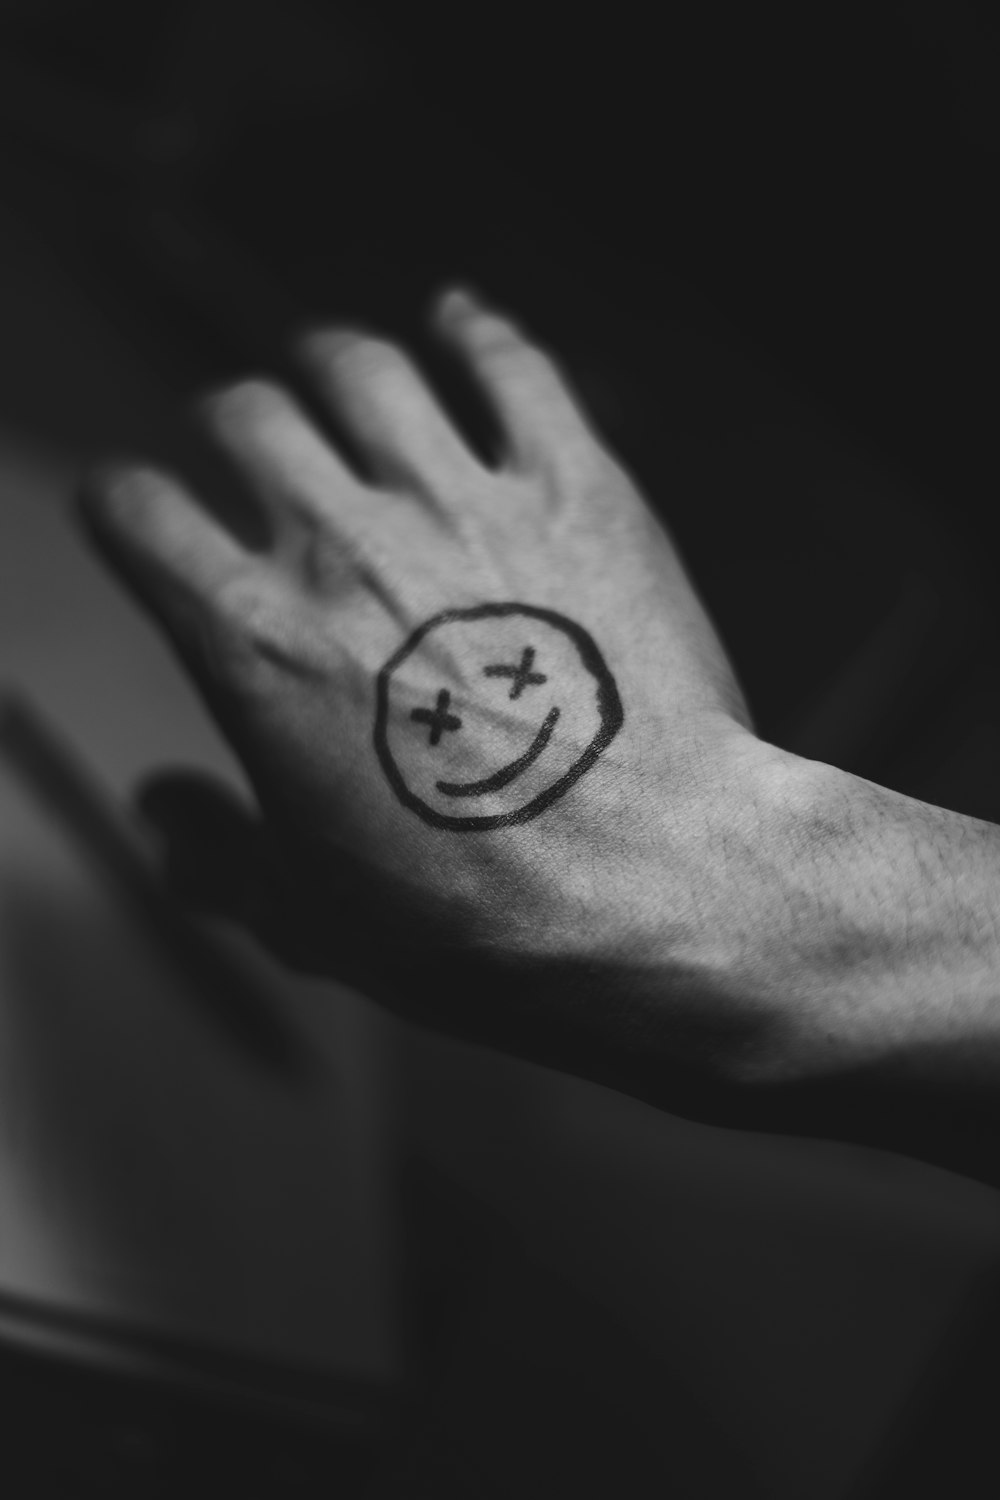 a hand with a smiley face tattoo on it